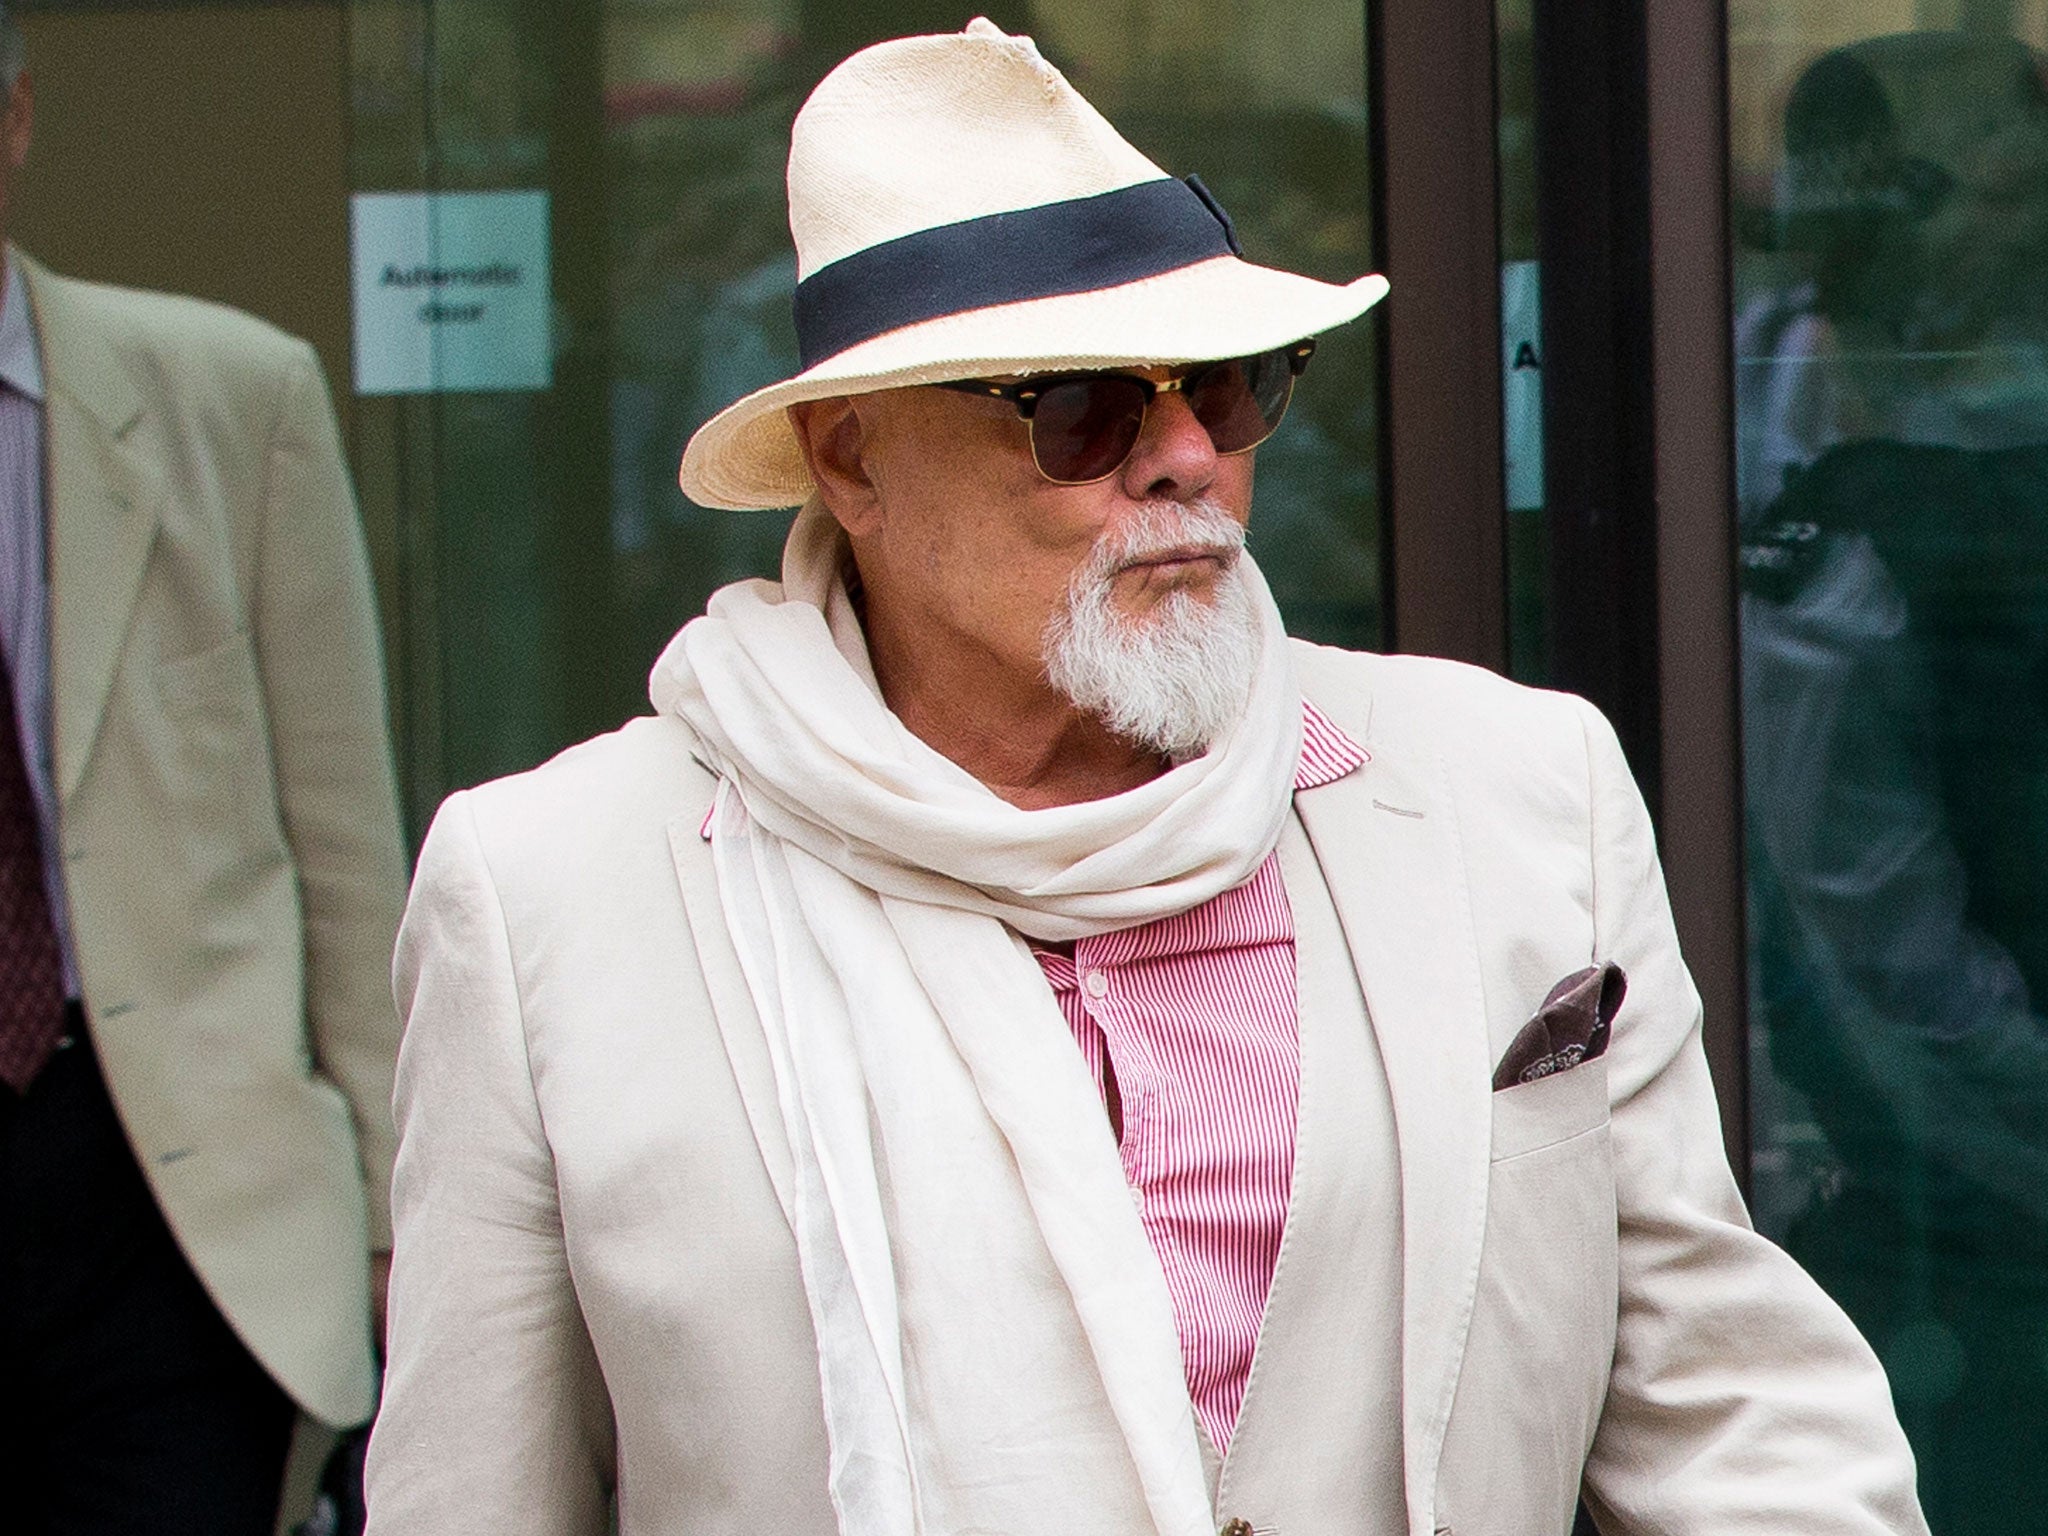 Gary Glitter departs court after facing charges of sexual offences at The City of Westminster Magistrates Court on June 19, 2014 in London, England.